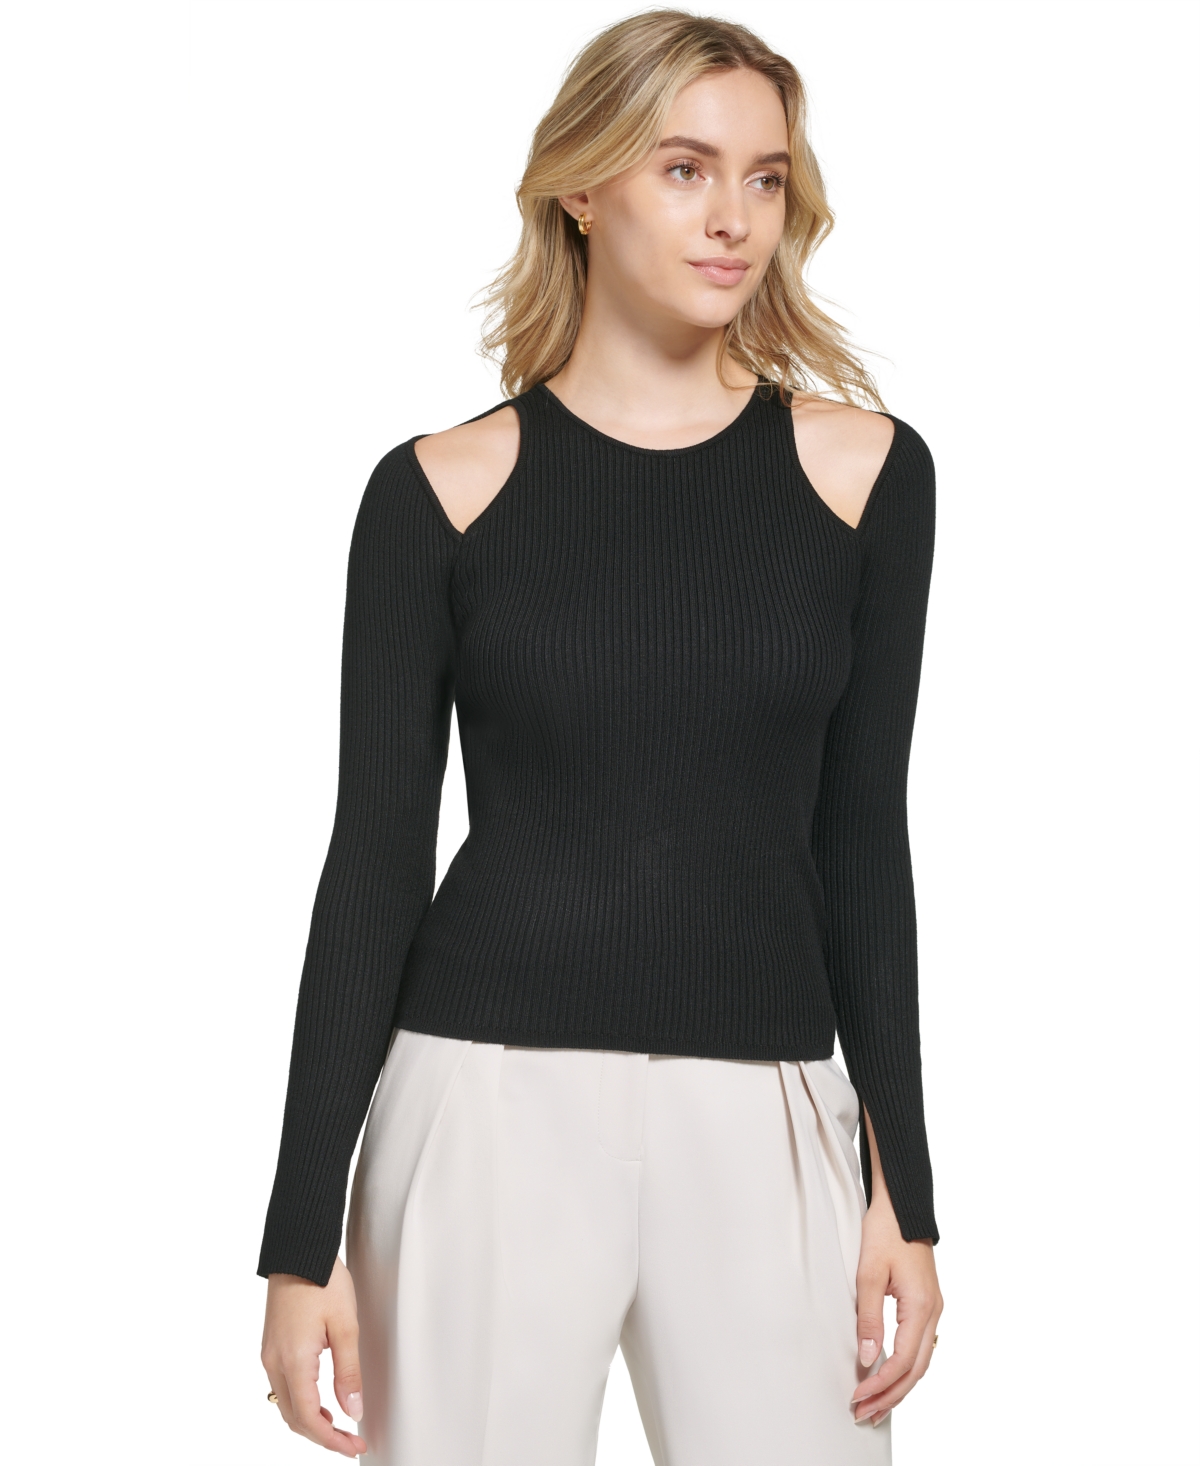 Women's CALVIN KLEIN Sweaters Sale, Up To 70% Off | ModeSens